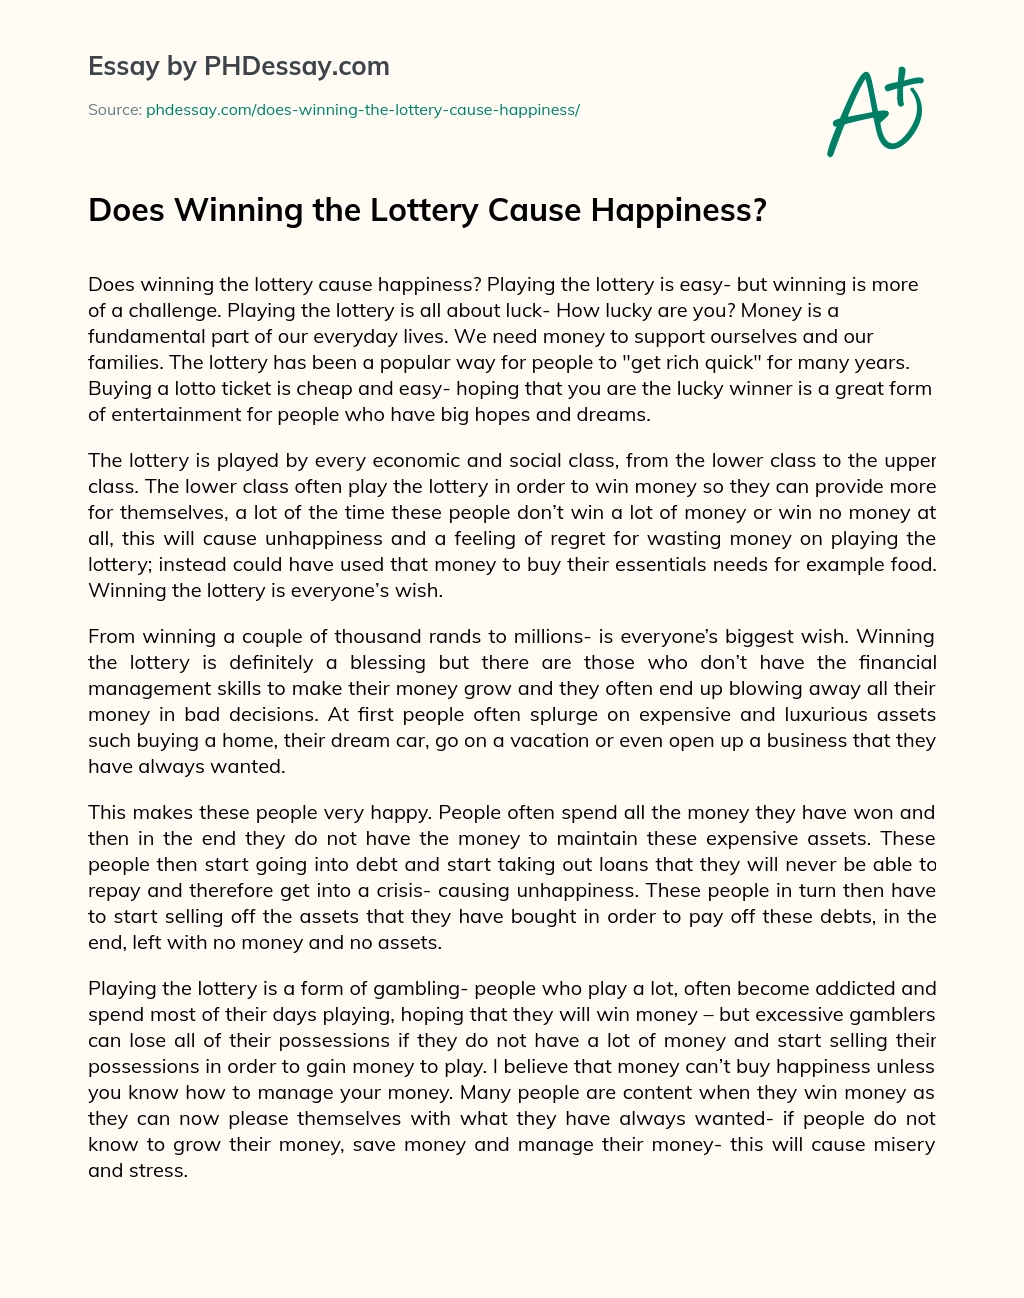 Does Winning the Lottery Cause Happiness? essay